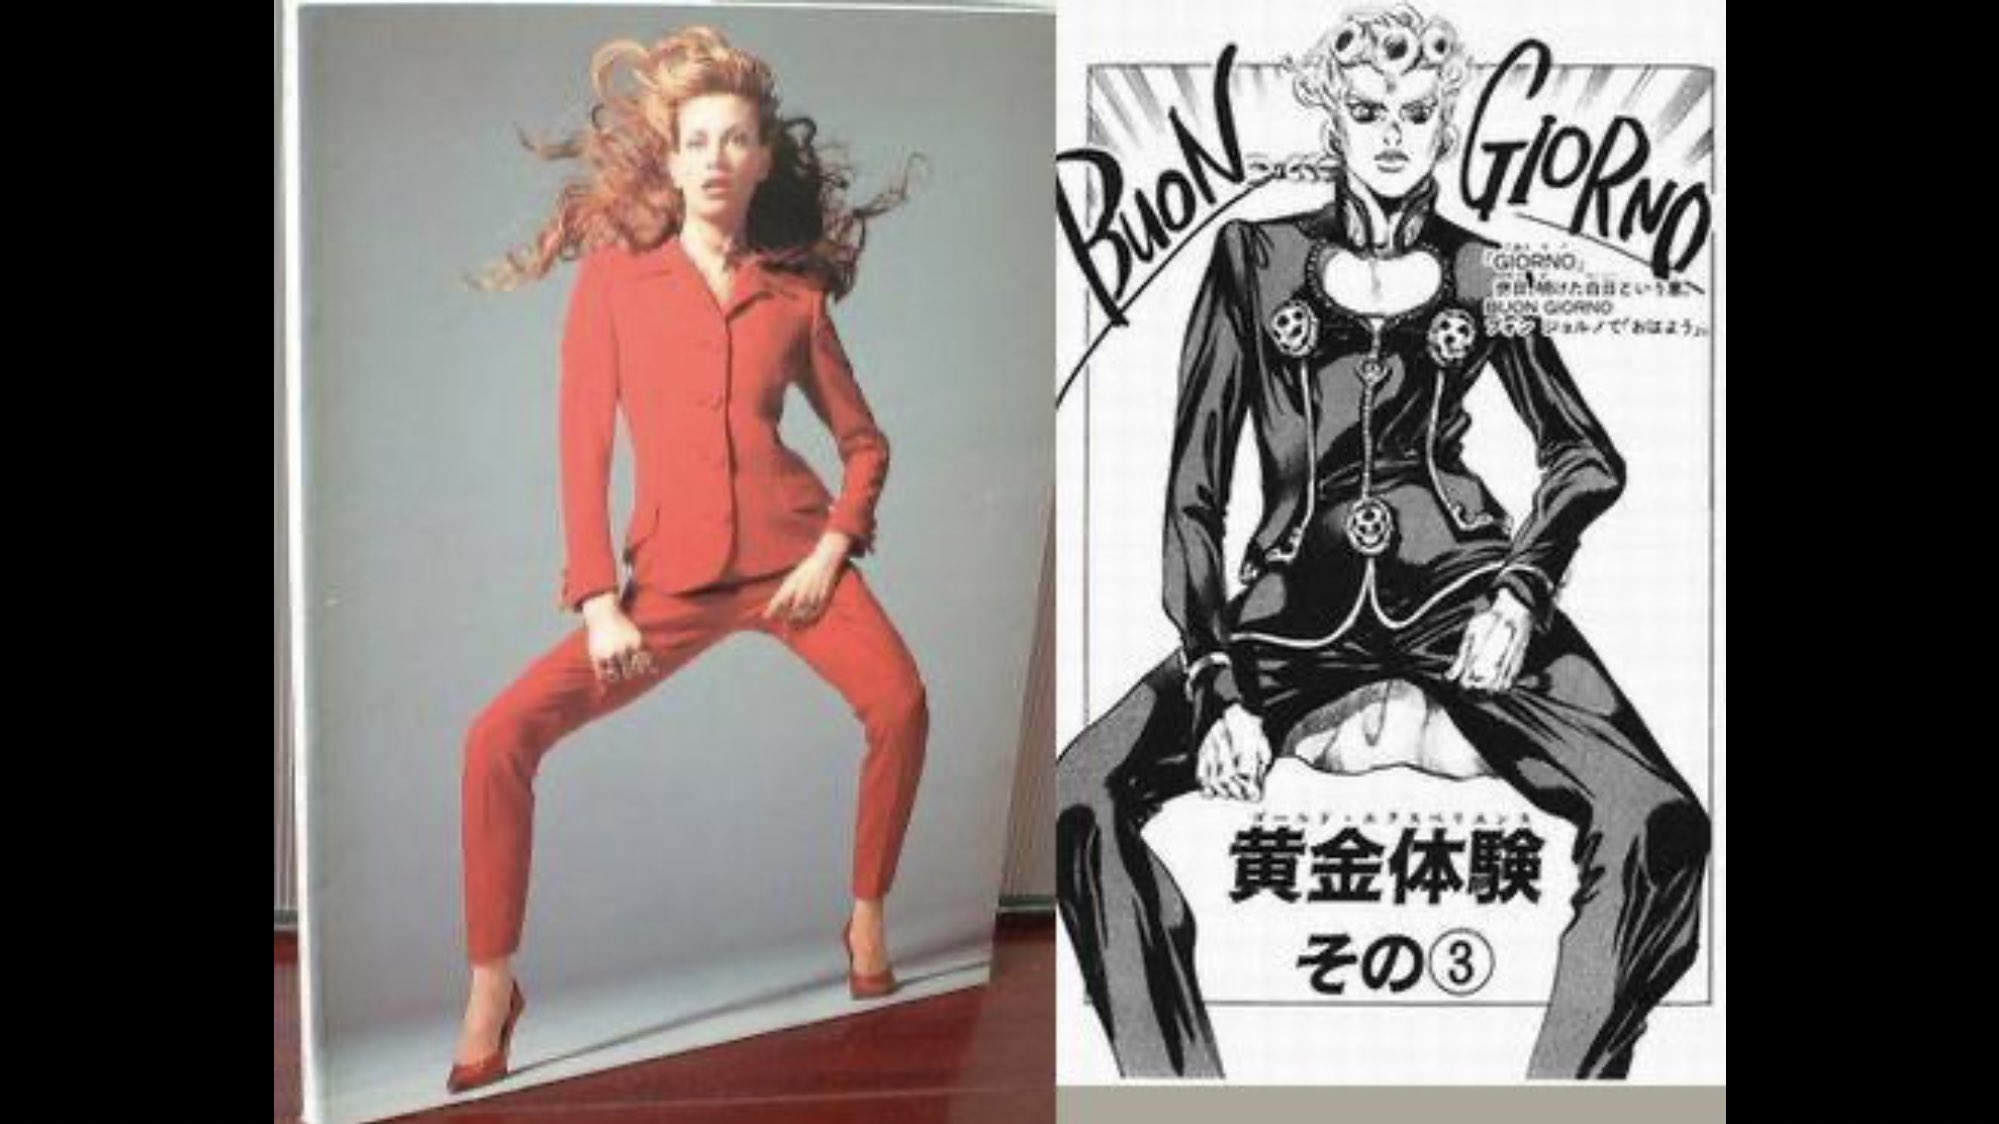 Y. Chang - 張永宜 on X: “All JoJo's Bizarre Adventure fans ever do is point  at high fashion and make a JoJo villain joke” Hey now, don't forget about  the heroes too!